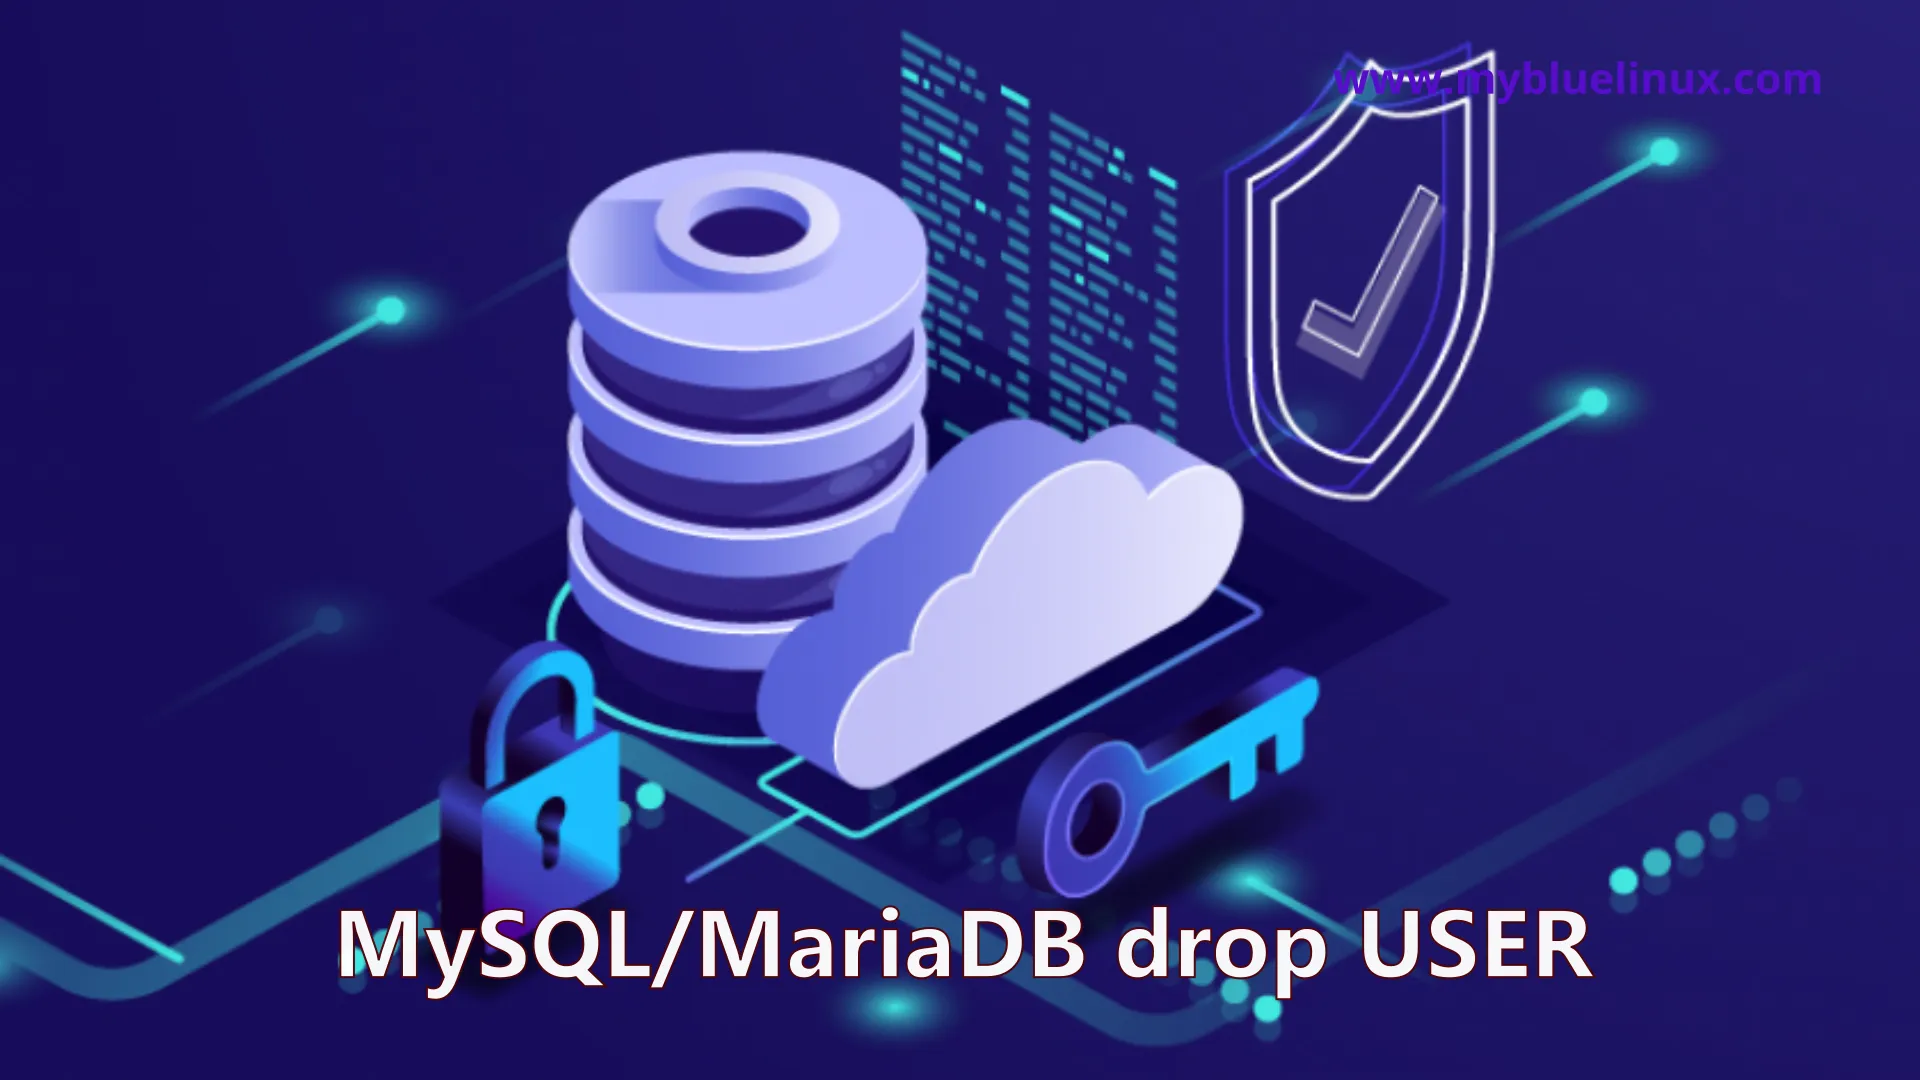 How to delete or remove a MySQL/MariaDB user account on Linux/Unix